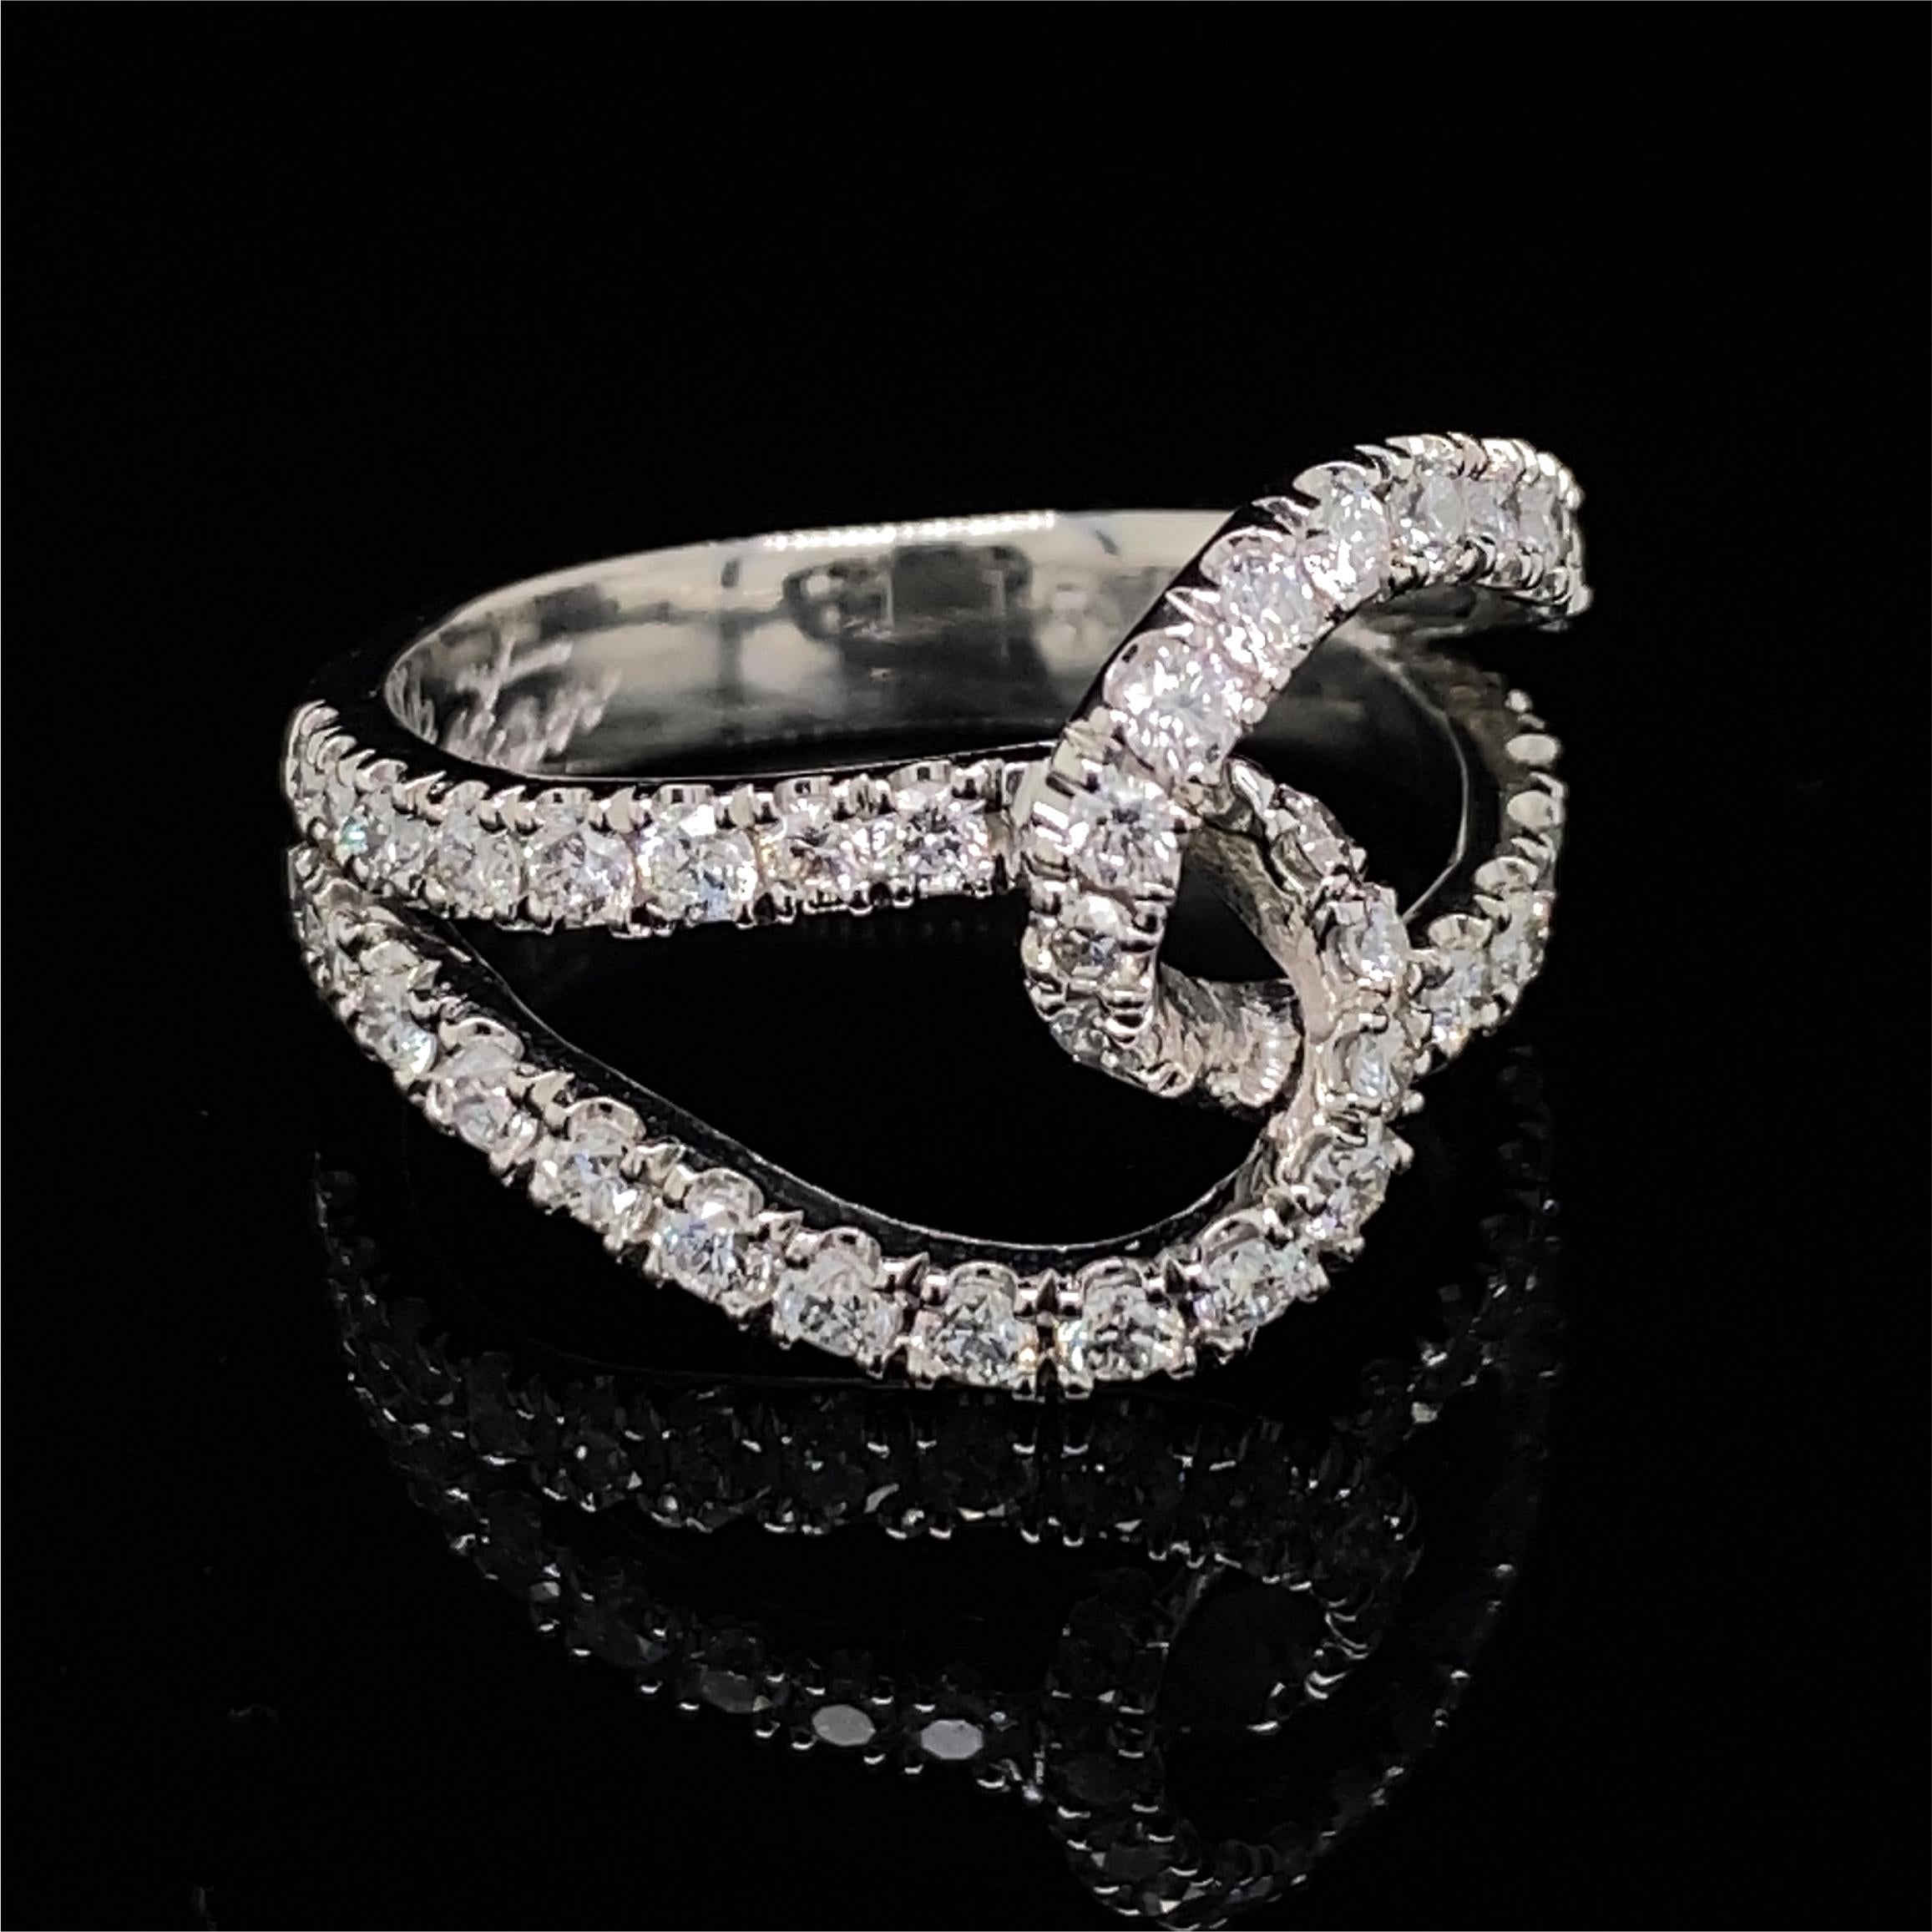 This is a classic design rendered with equestrian flair by Eytan Brandes in platinum with 44 bright white high-quality natural, earth-mined and untreated diamonds with a total weight of 0.88 carats in clean, modern U settings.  

Made from a single